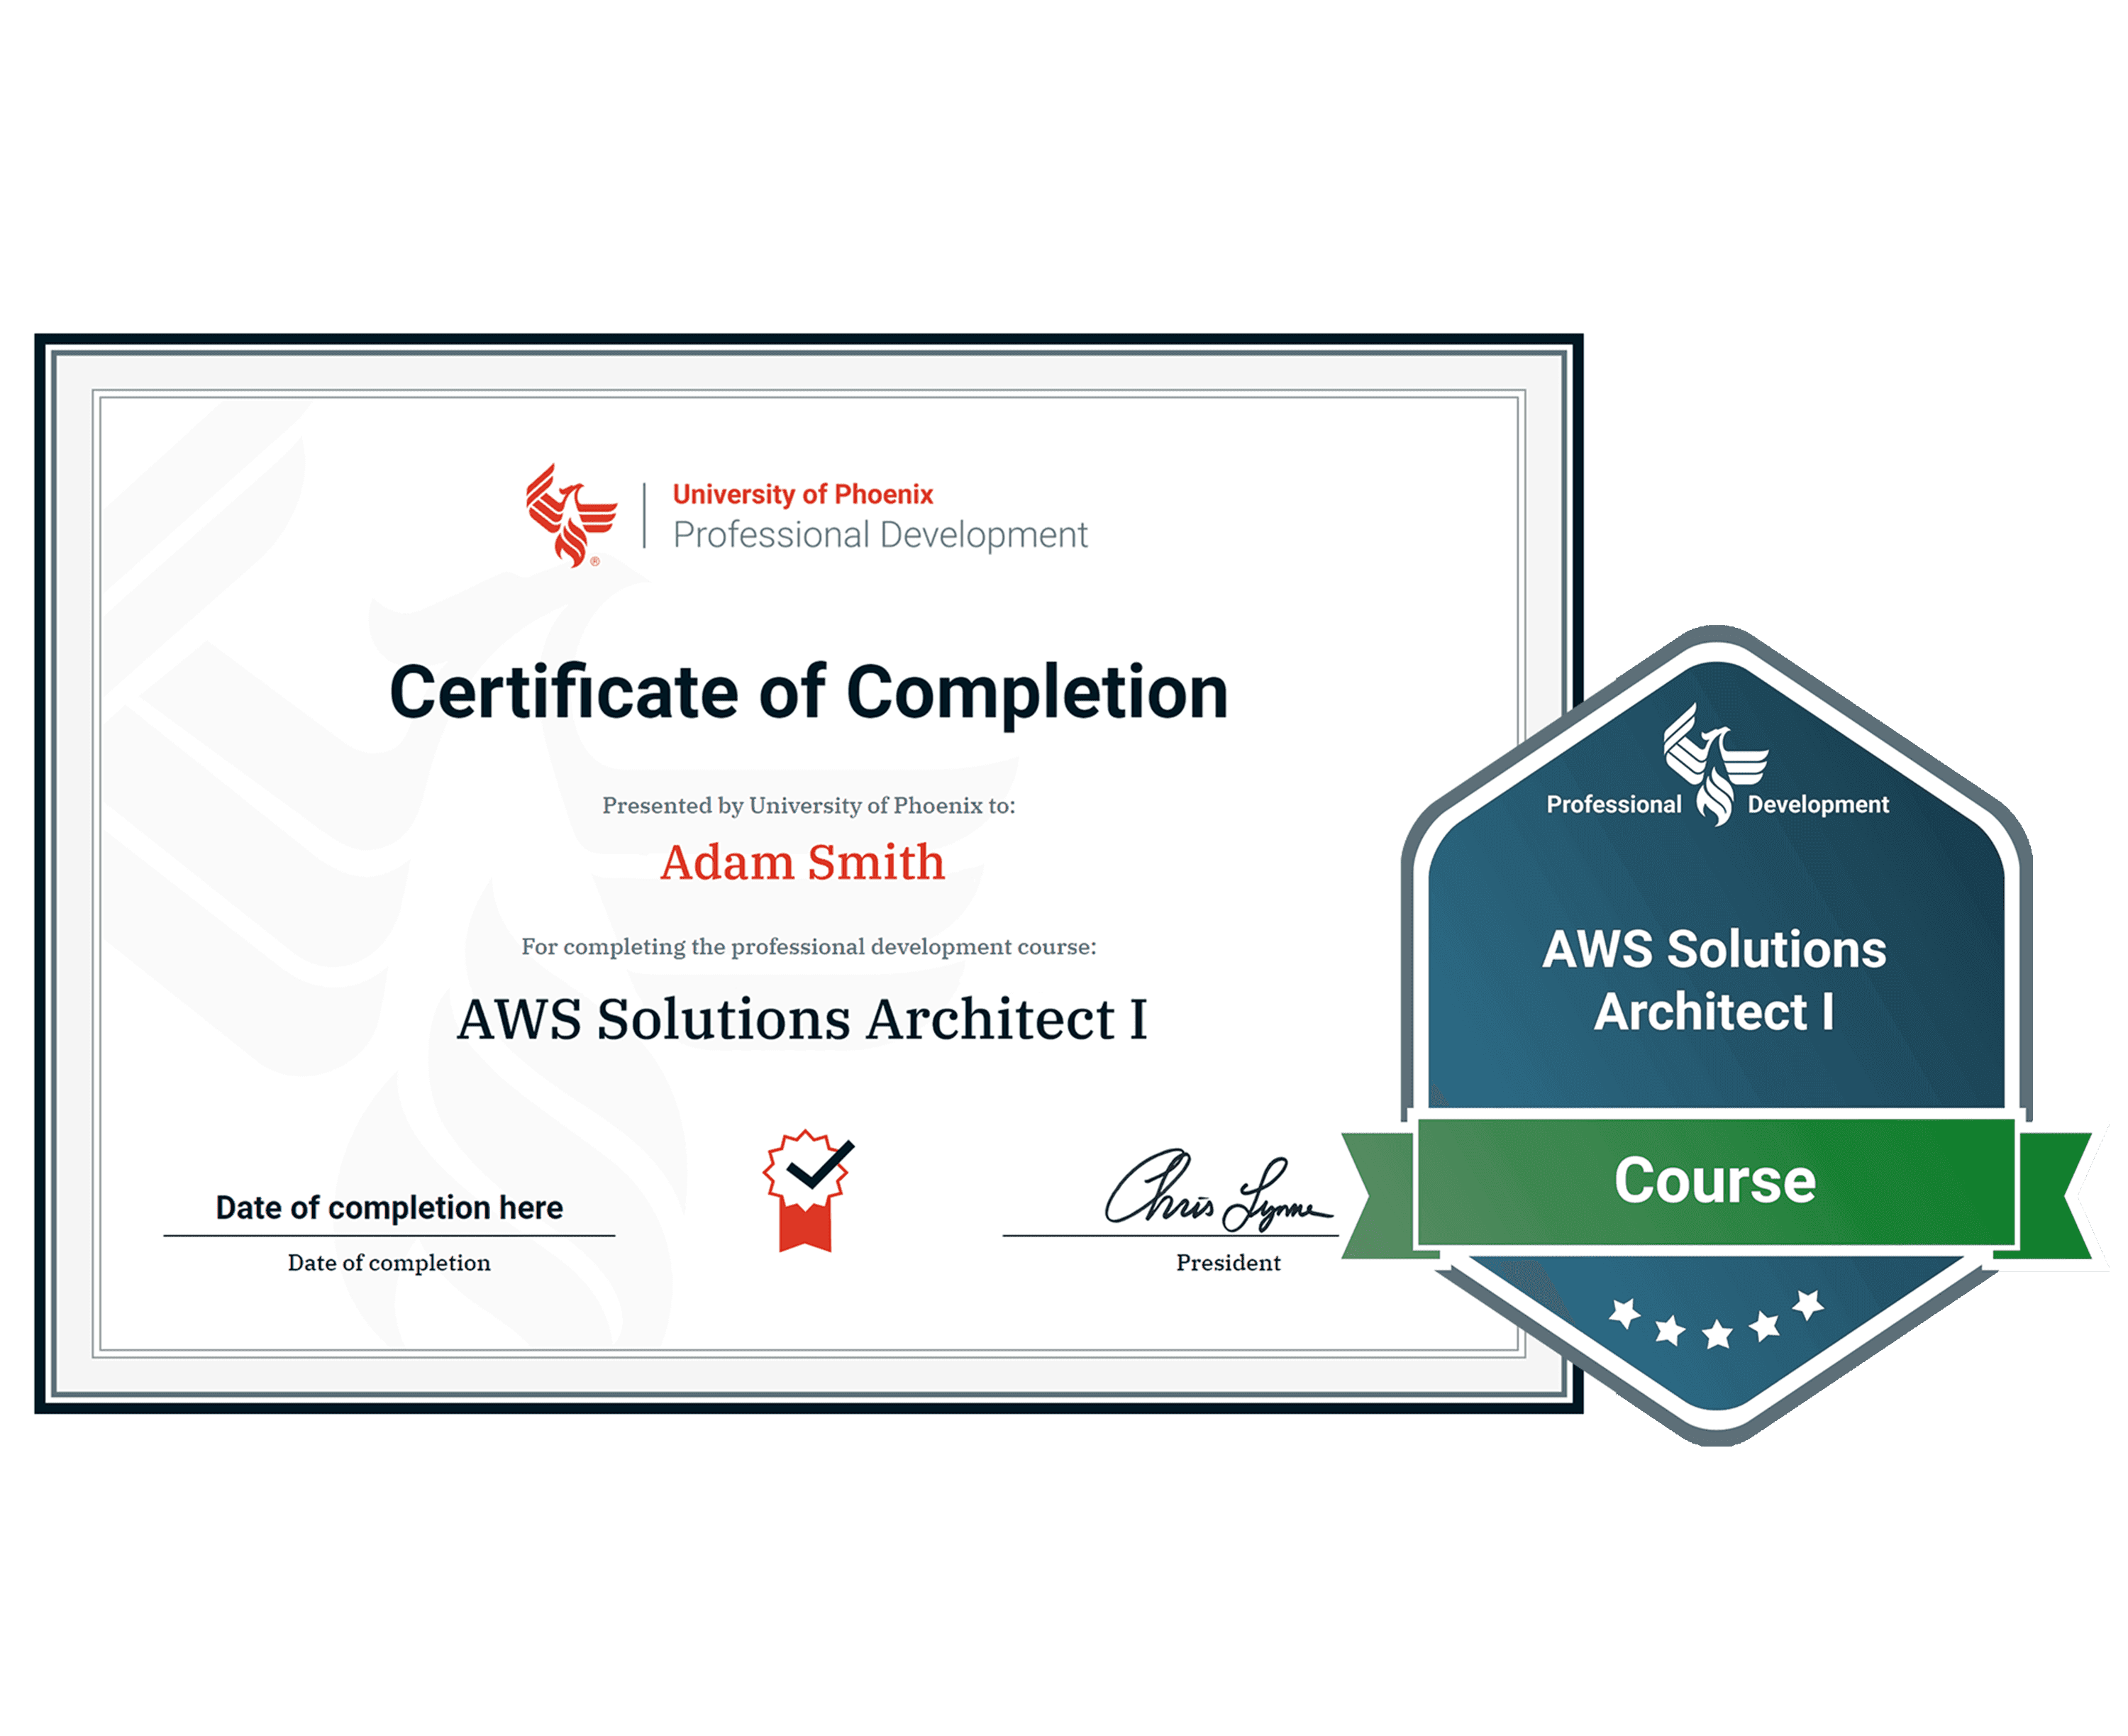 Sample certificate and badge for AWS Solutions Architect 1 course